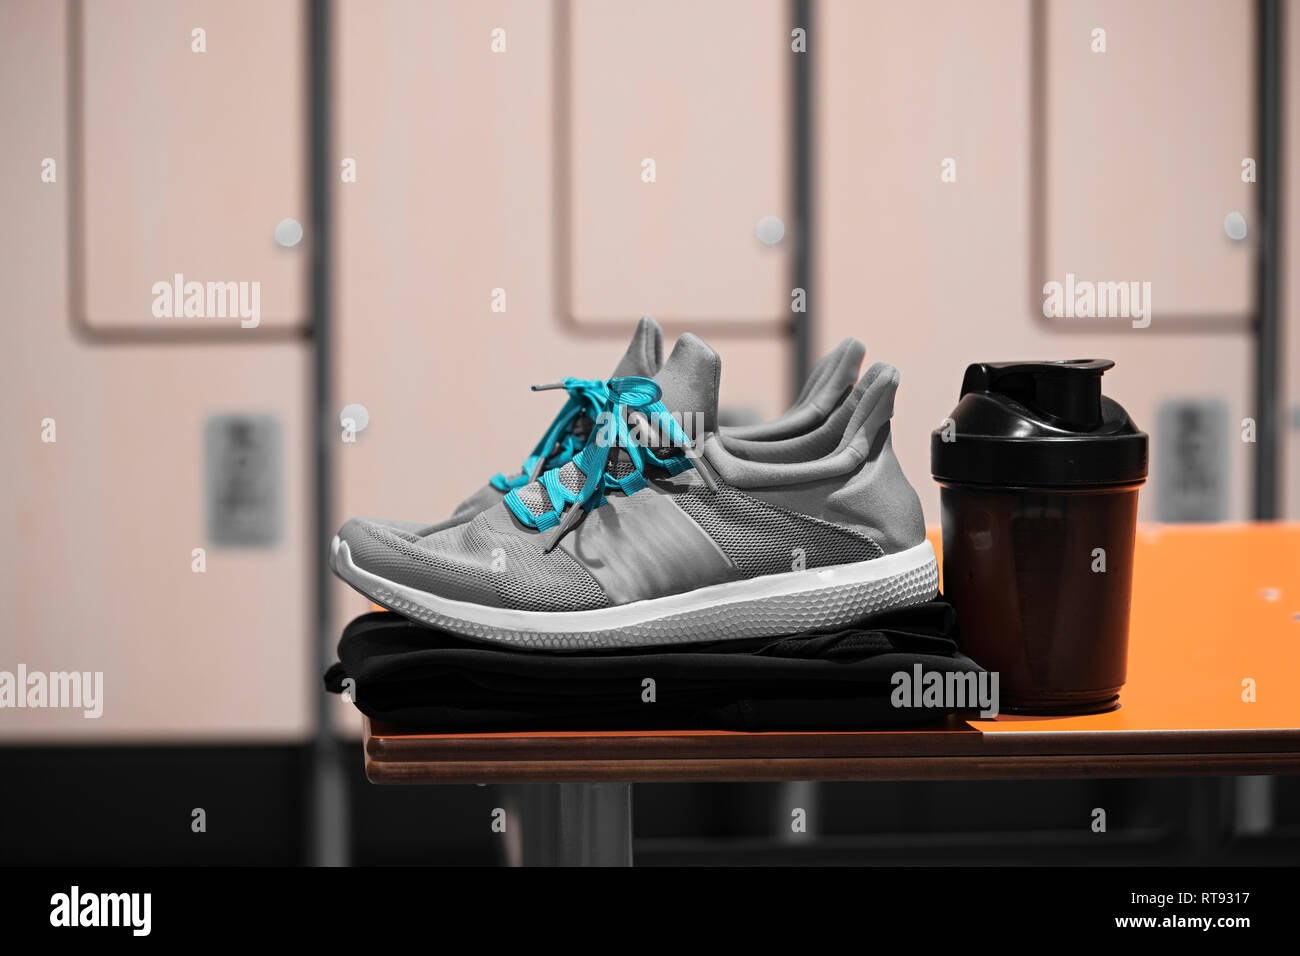 Close up of sports shoes, sportswear and sport water bottle in gym locker room. Concept of active lifestyle, gaining muscles or loosing fat. Sport equ Stock Photo